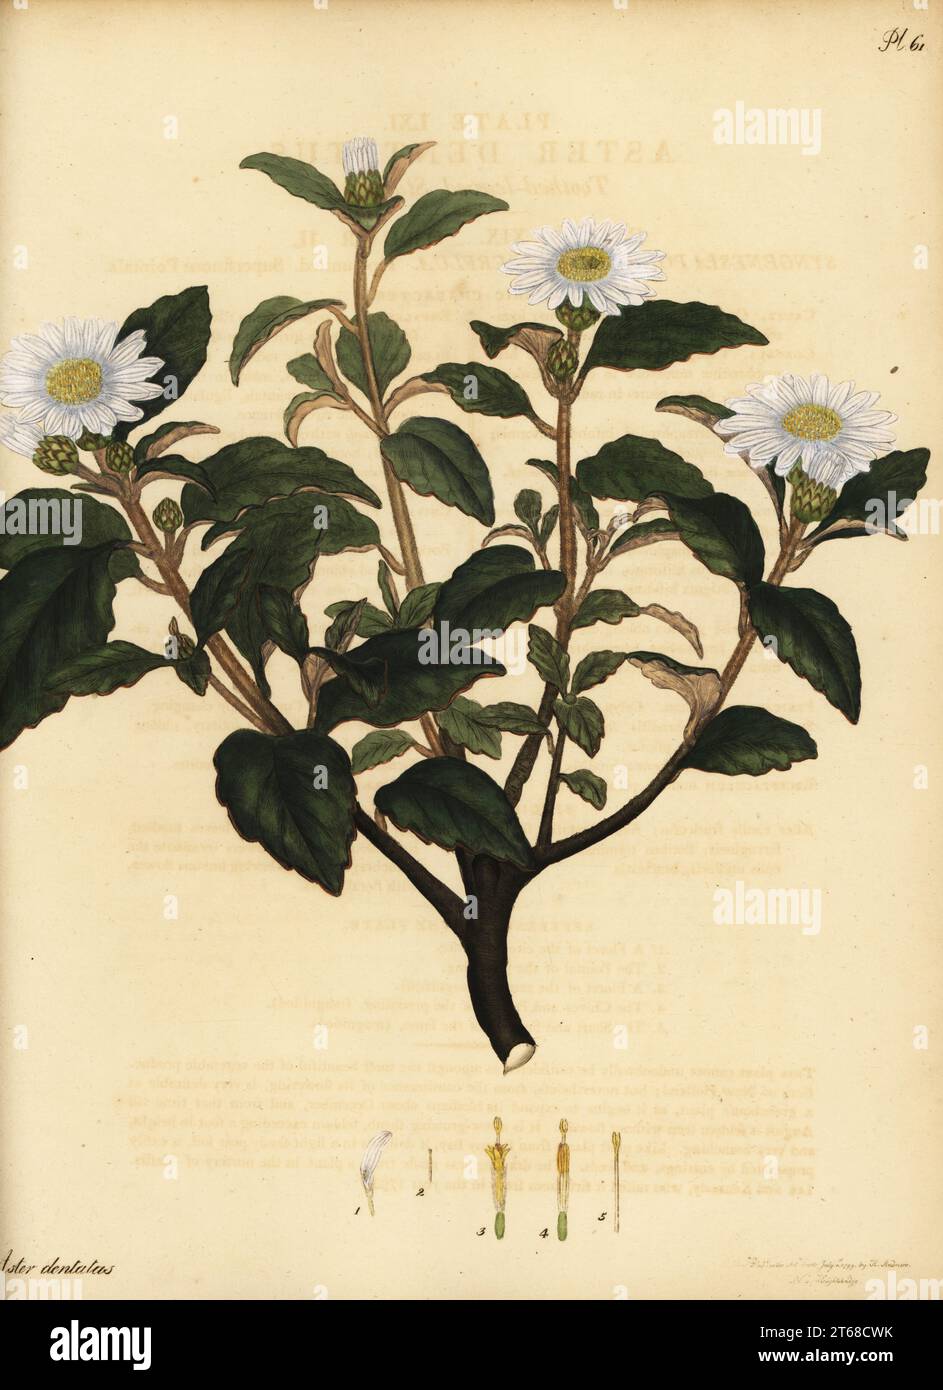 Downy daisy bush, Olearia tomentosa, native to New South Wales, Australia. Toothed-leaved starwort, Aster dentatus. Copperplate engraving drawn, engraved and hand-coloured by Henry Andrews from his Botanical Register, Volume 1, published in London, 1799. Stock Photo